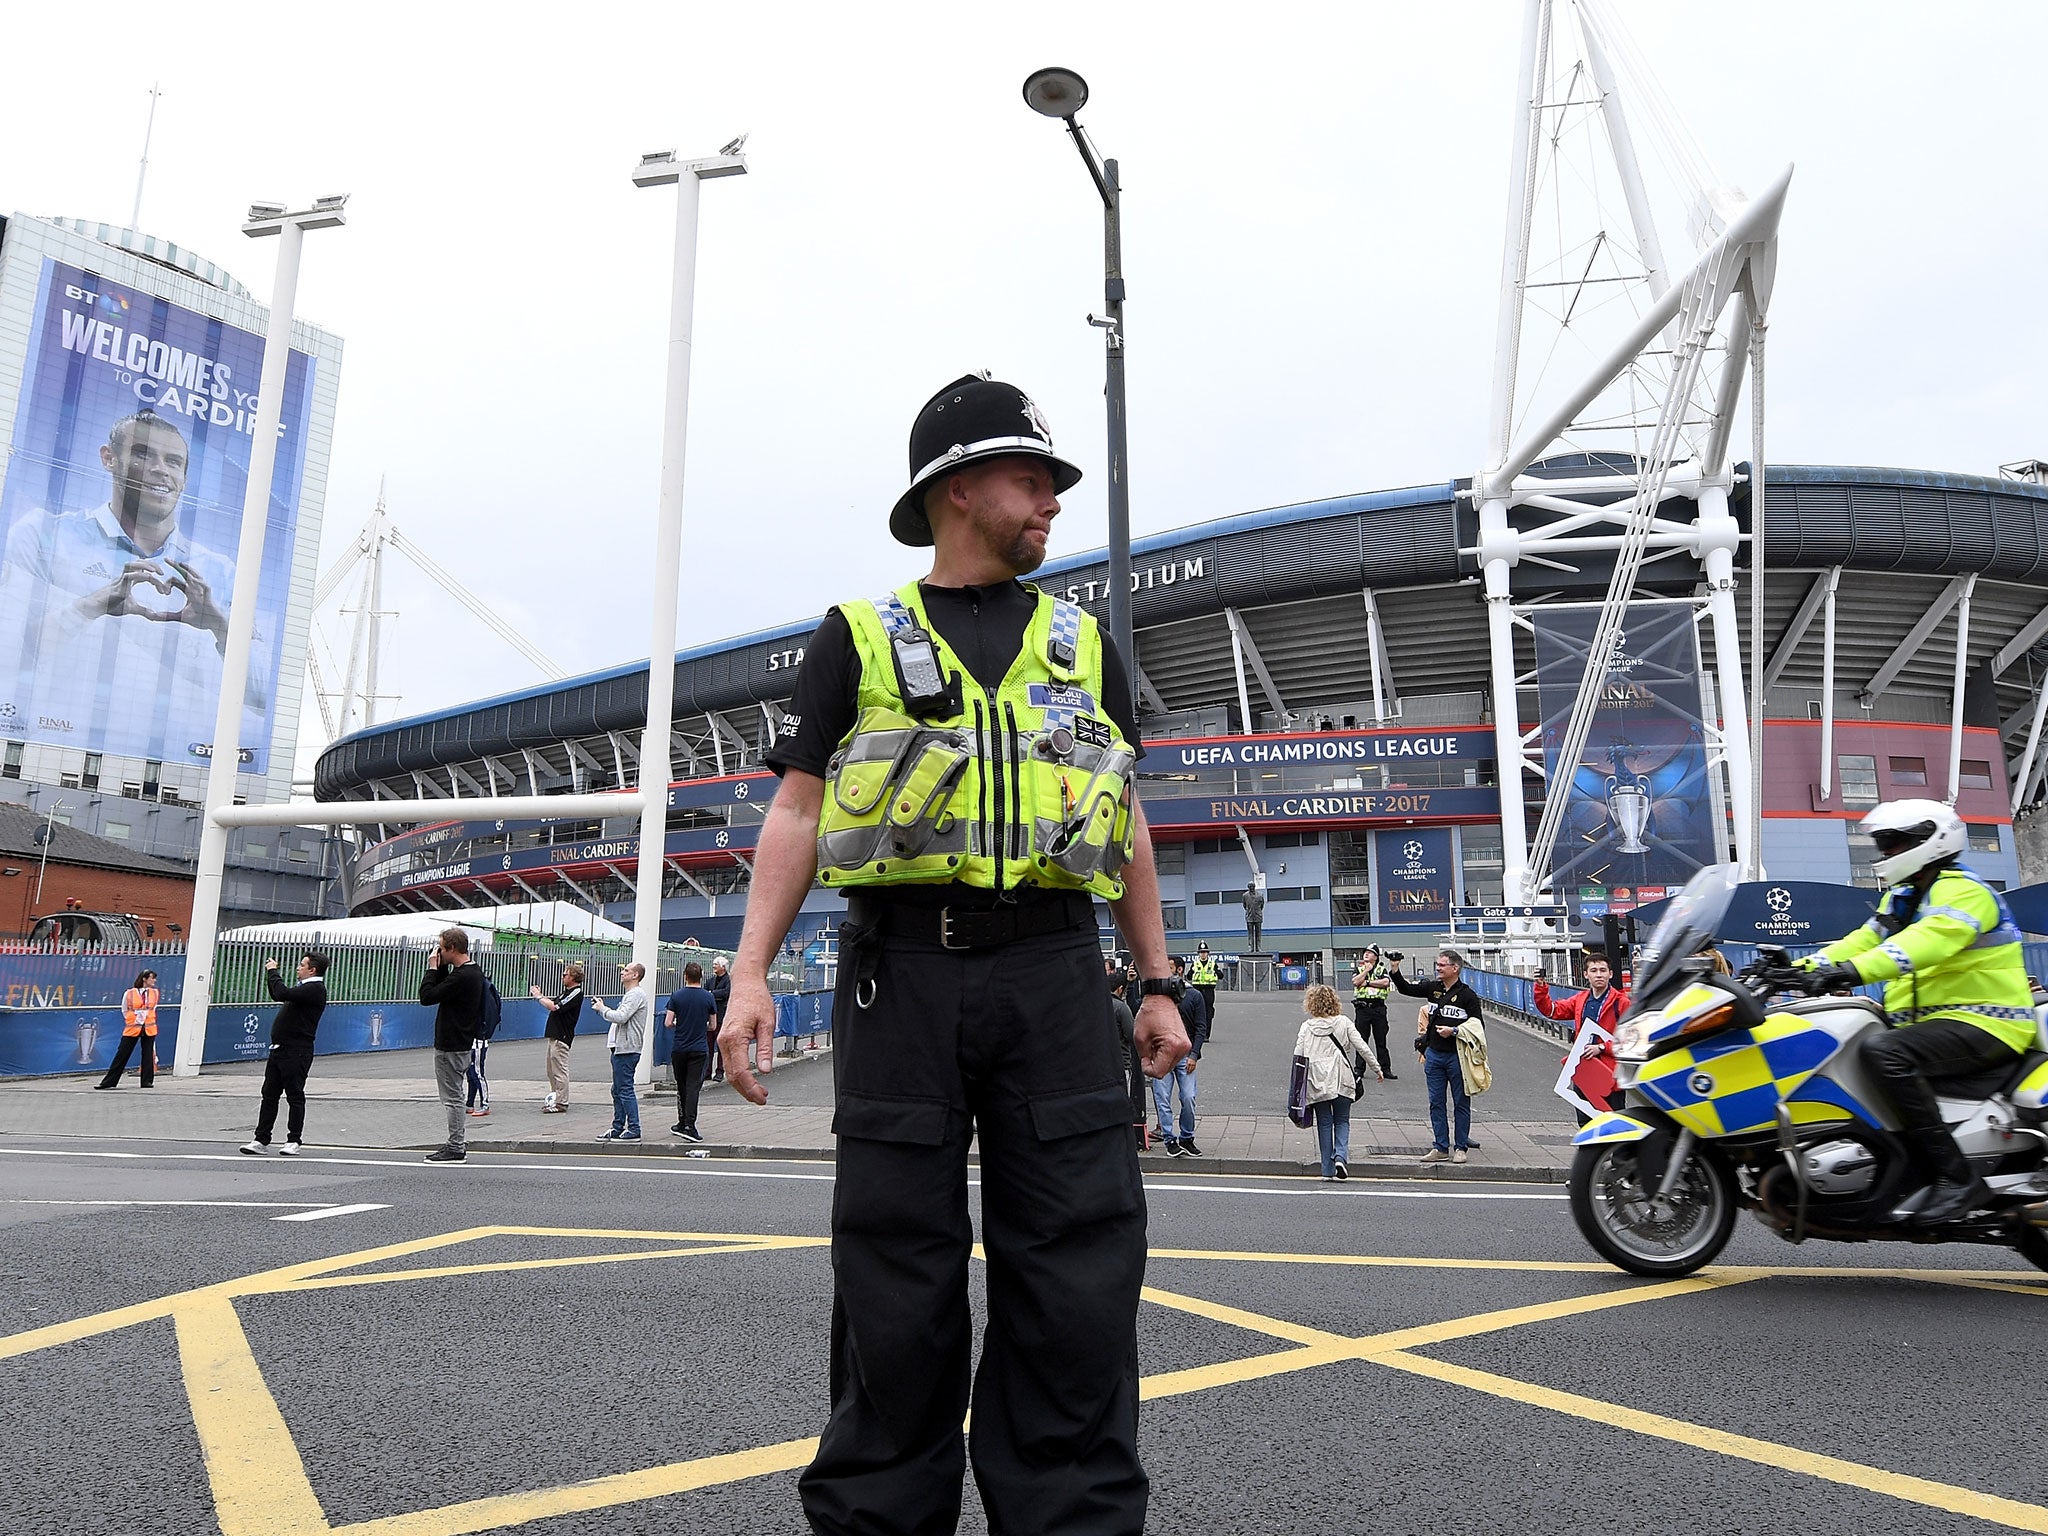 The stadium in Cardiff has seen crowd difficulties